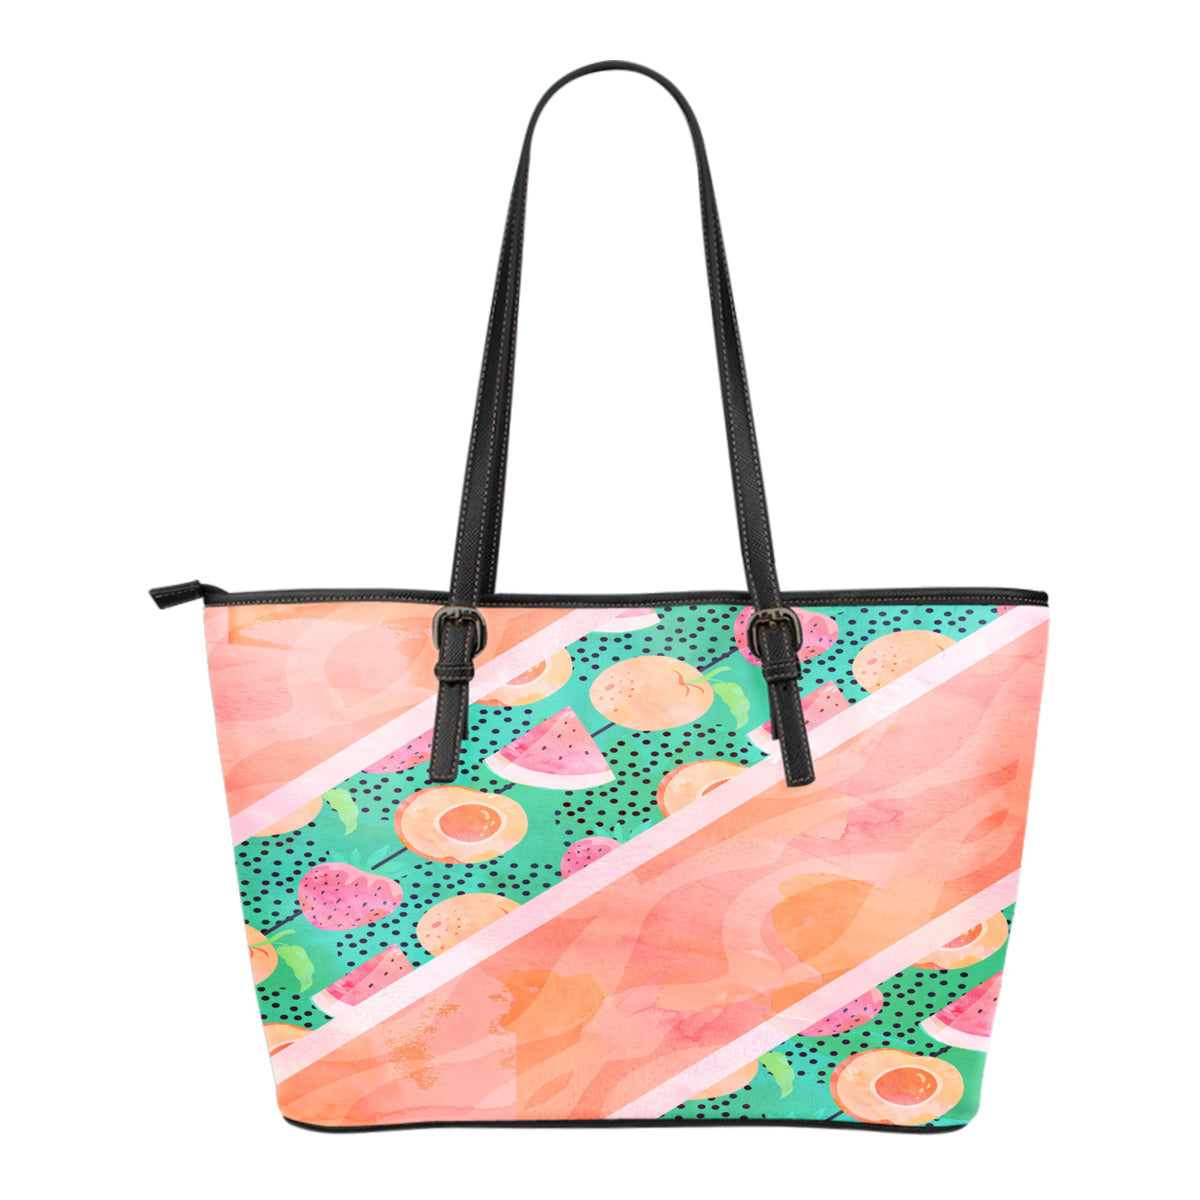 Fruits Themed Design C2 Women Large Leather Tote Bag